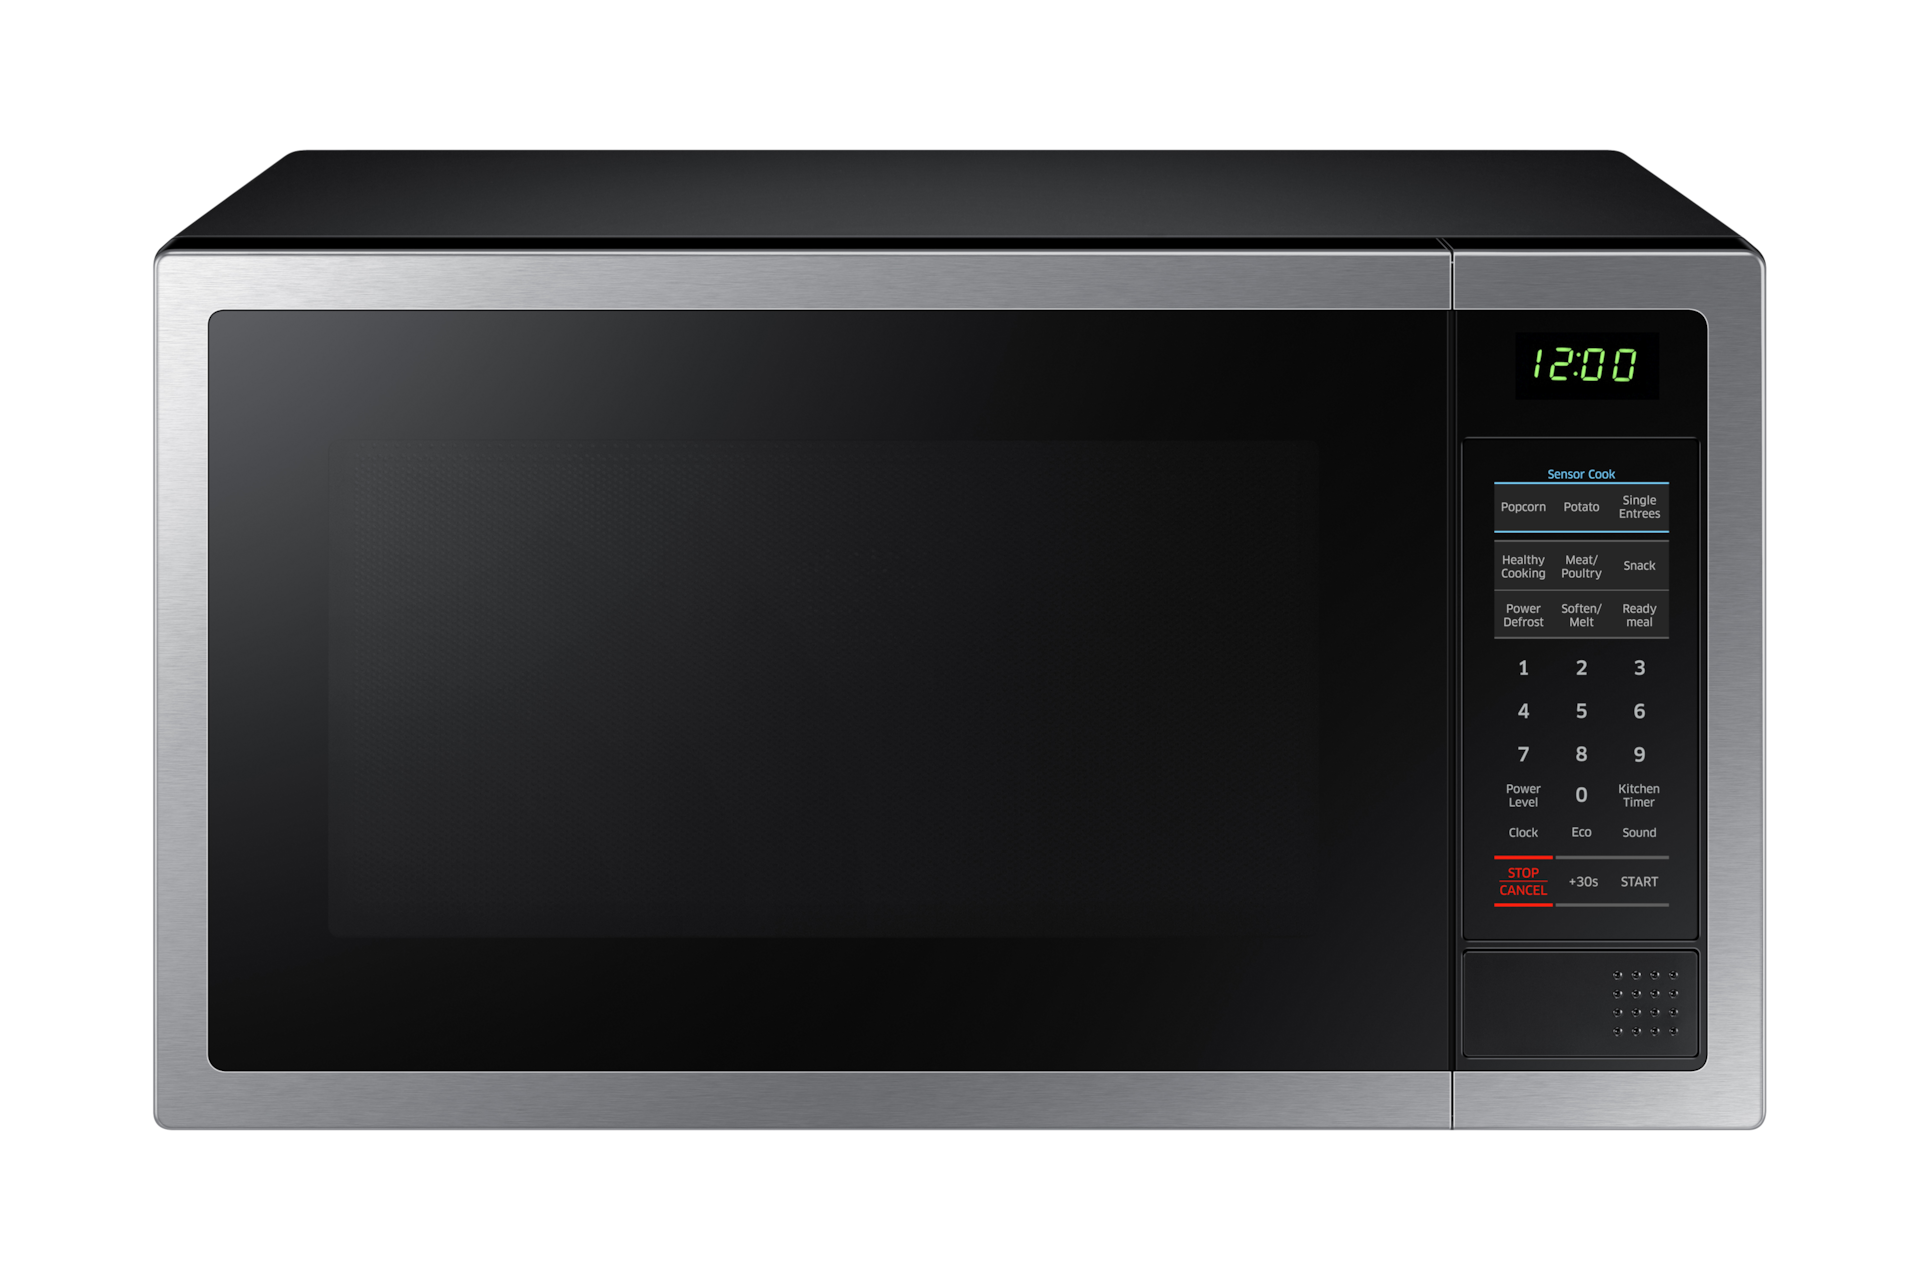 Samsung 28L, Electronic Solo, Microwave Oven, with Auto Cook and 11 Power Levels, ME6104ST1 in Silver